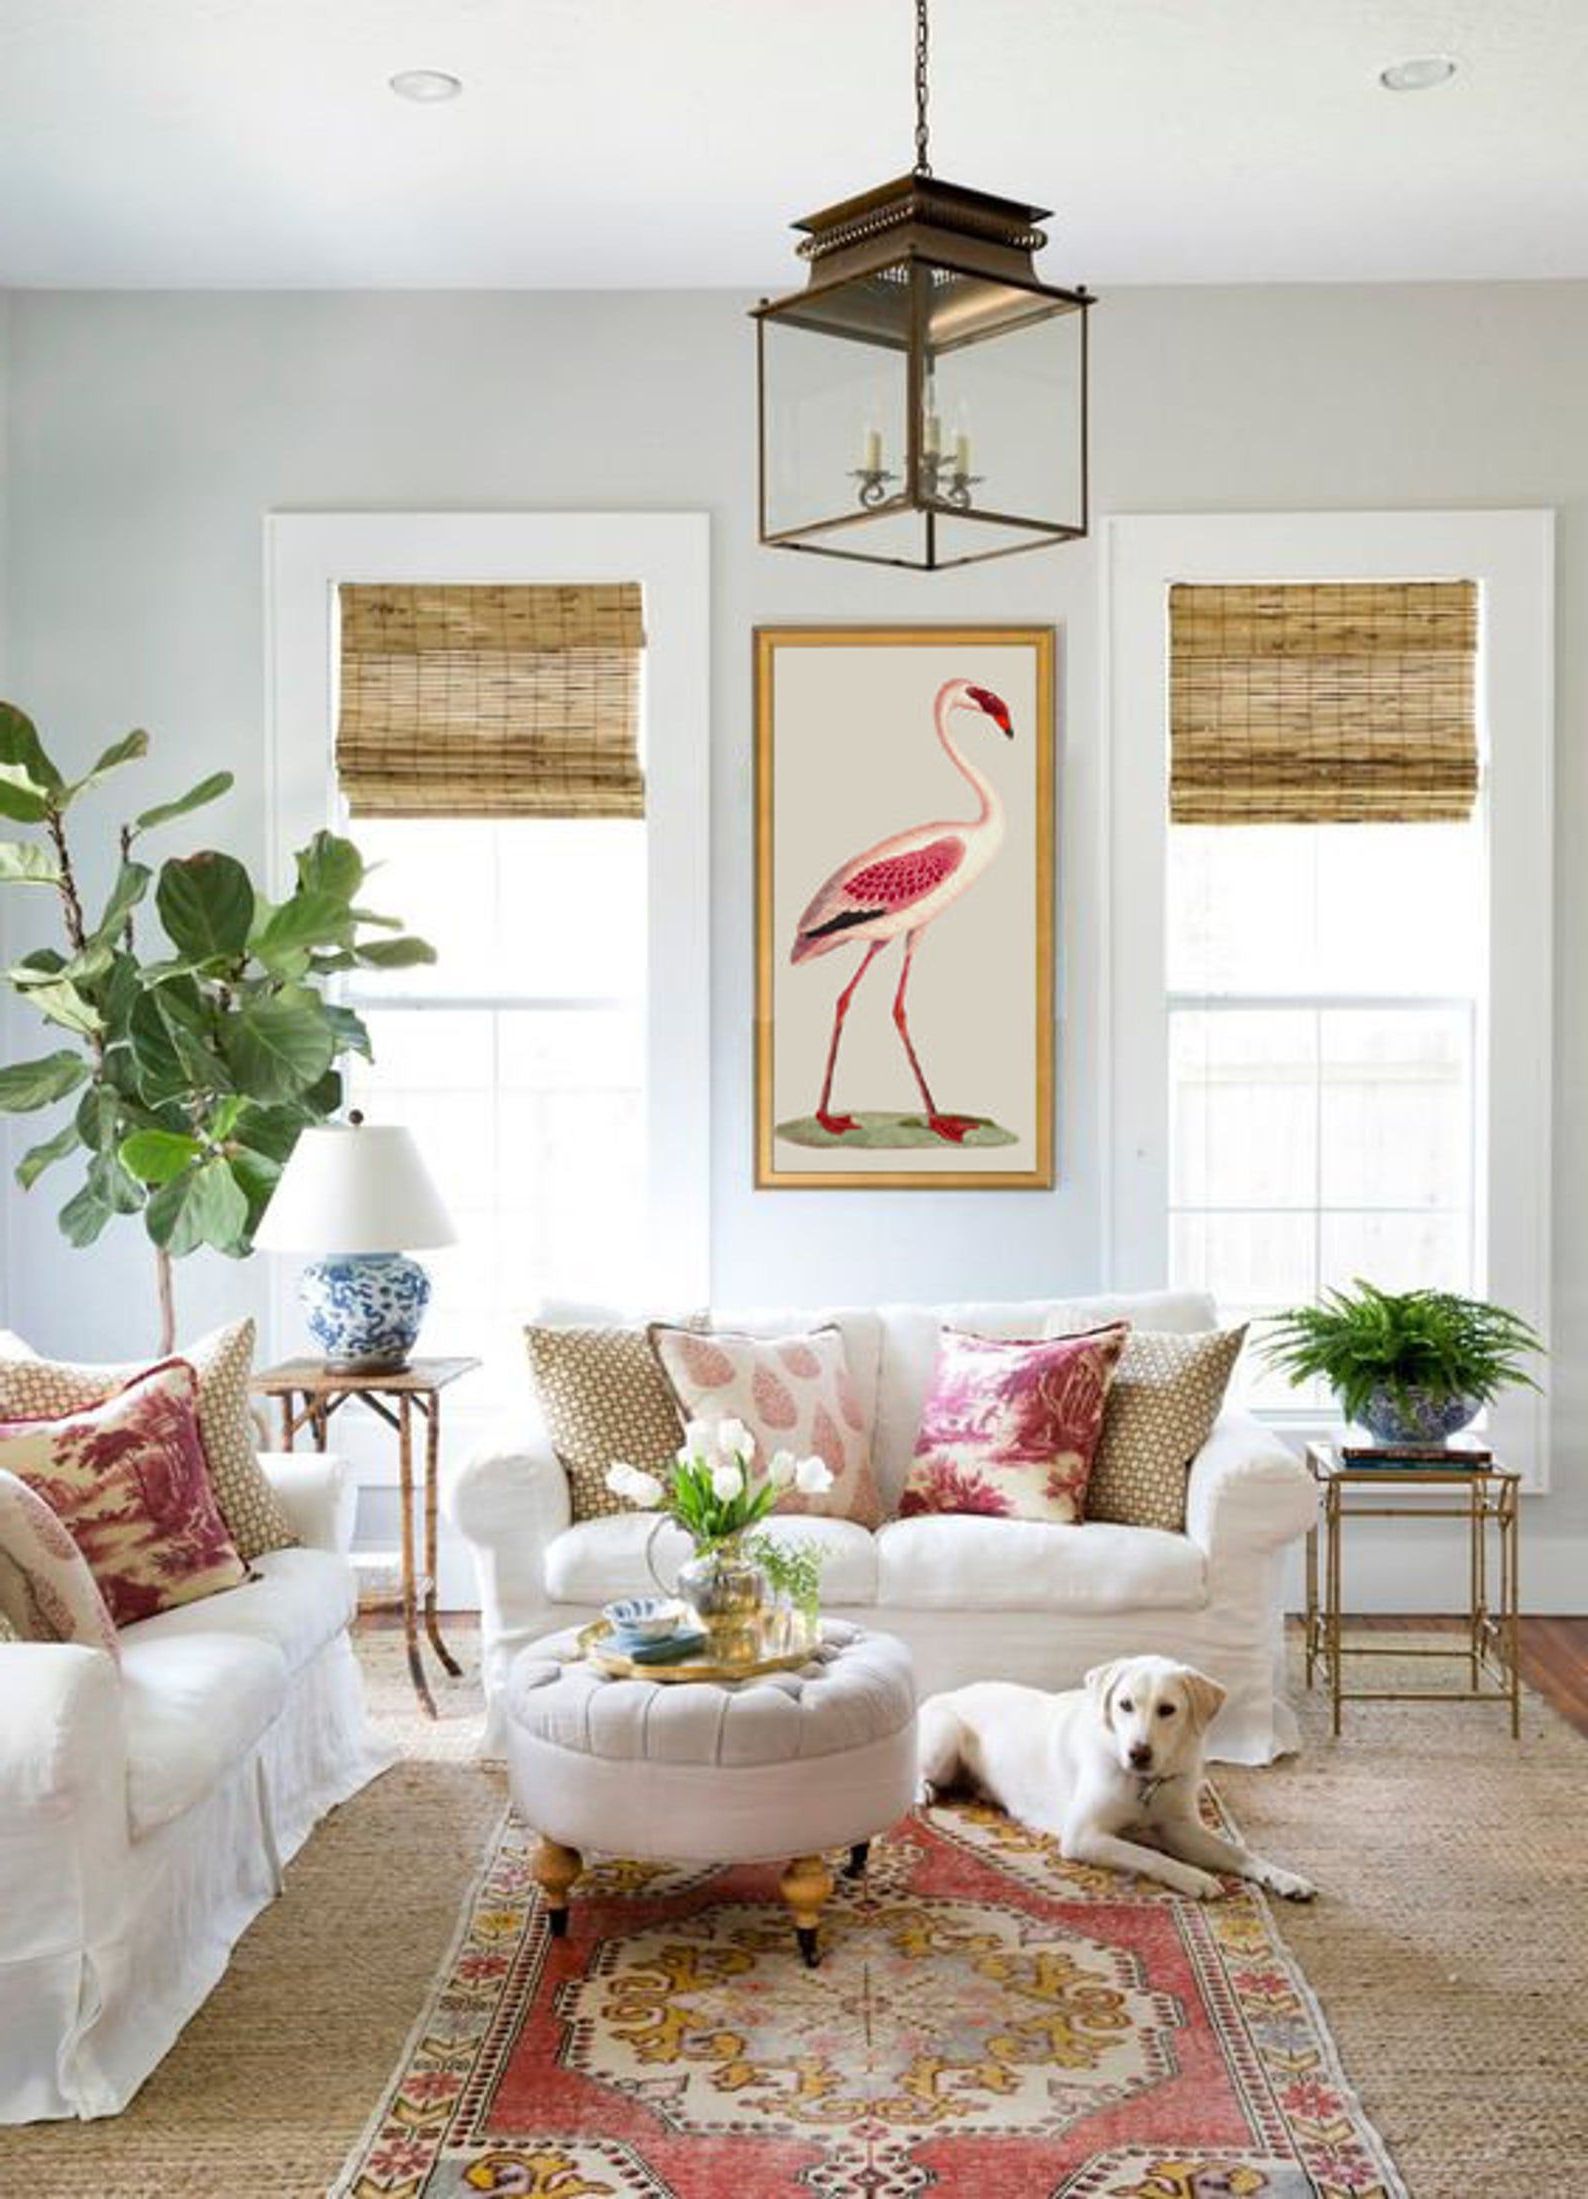 Latest Pink Flamingo Print Large Wall Art Decor Bird Illustration Inside Blended Fabric Hidden Garden Chinoiserie Wall Hangings With Rod (View 18 of 20)